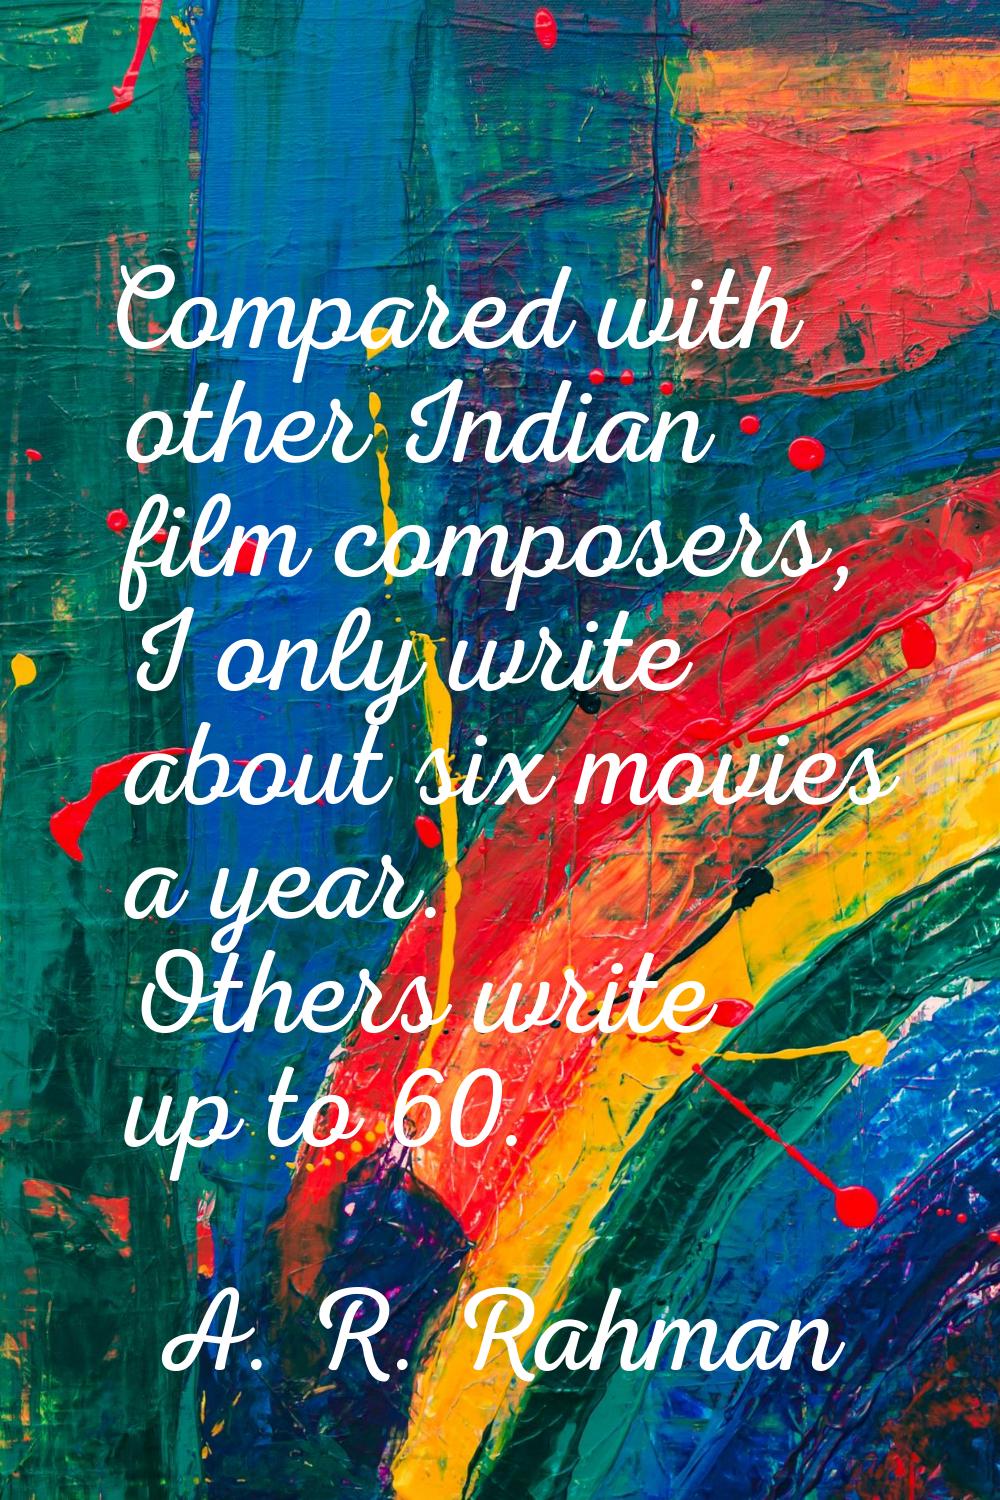 Compared with other Indian film composers, I only write about six movies a year. Others write up to